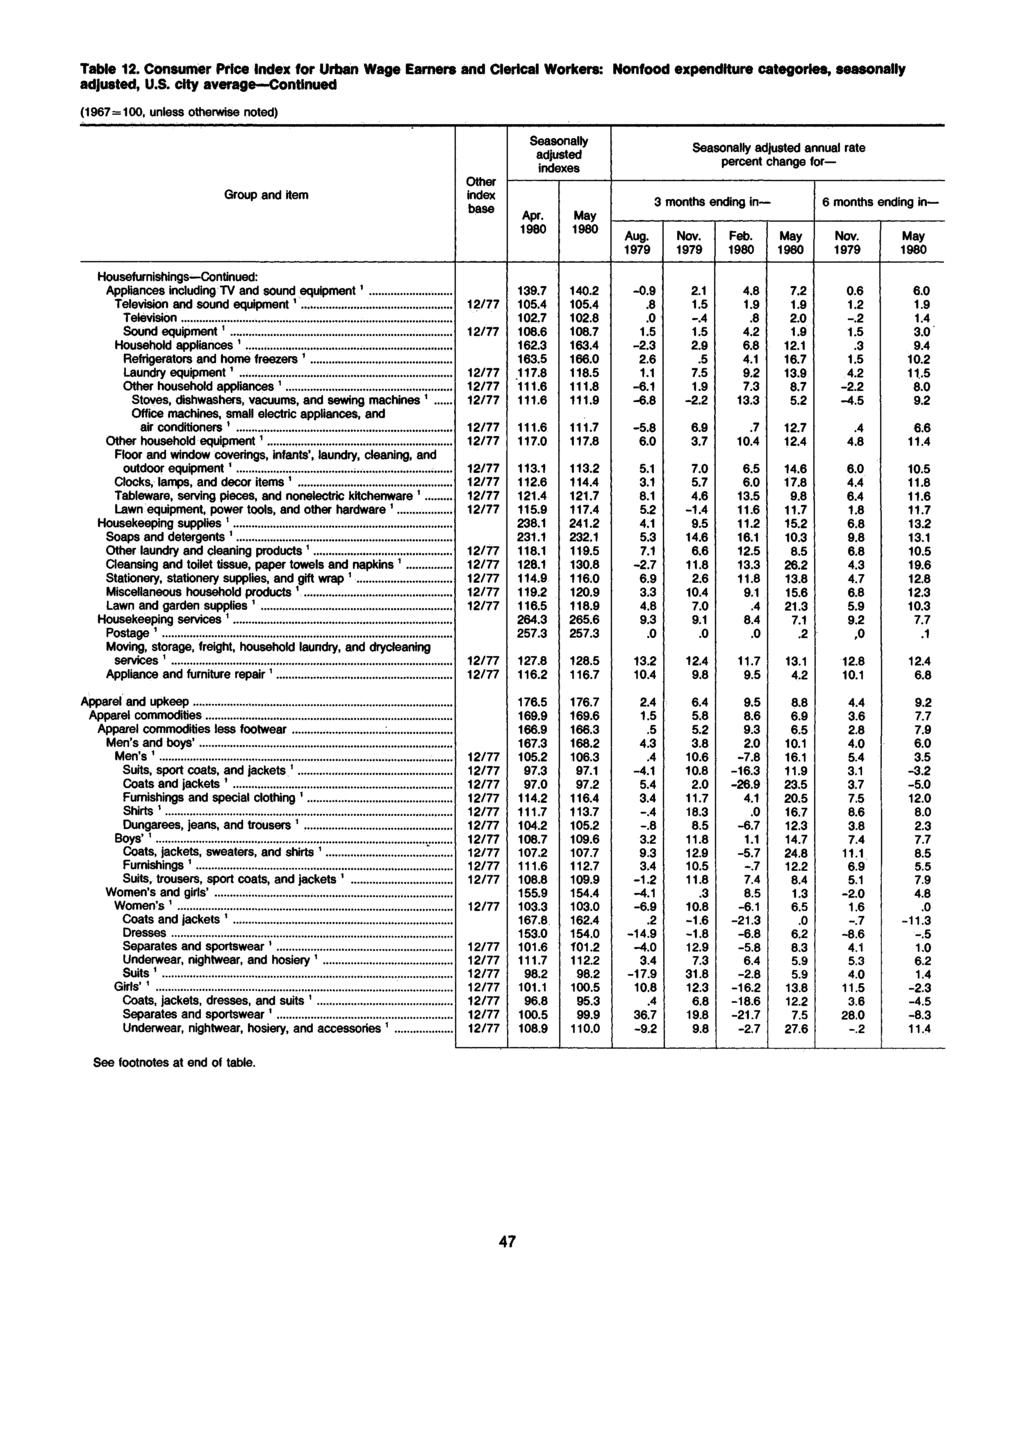 Table 12. Consumer Price for Urban Wage Earners and Clerical Workers: adjusted, U.S.